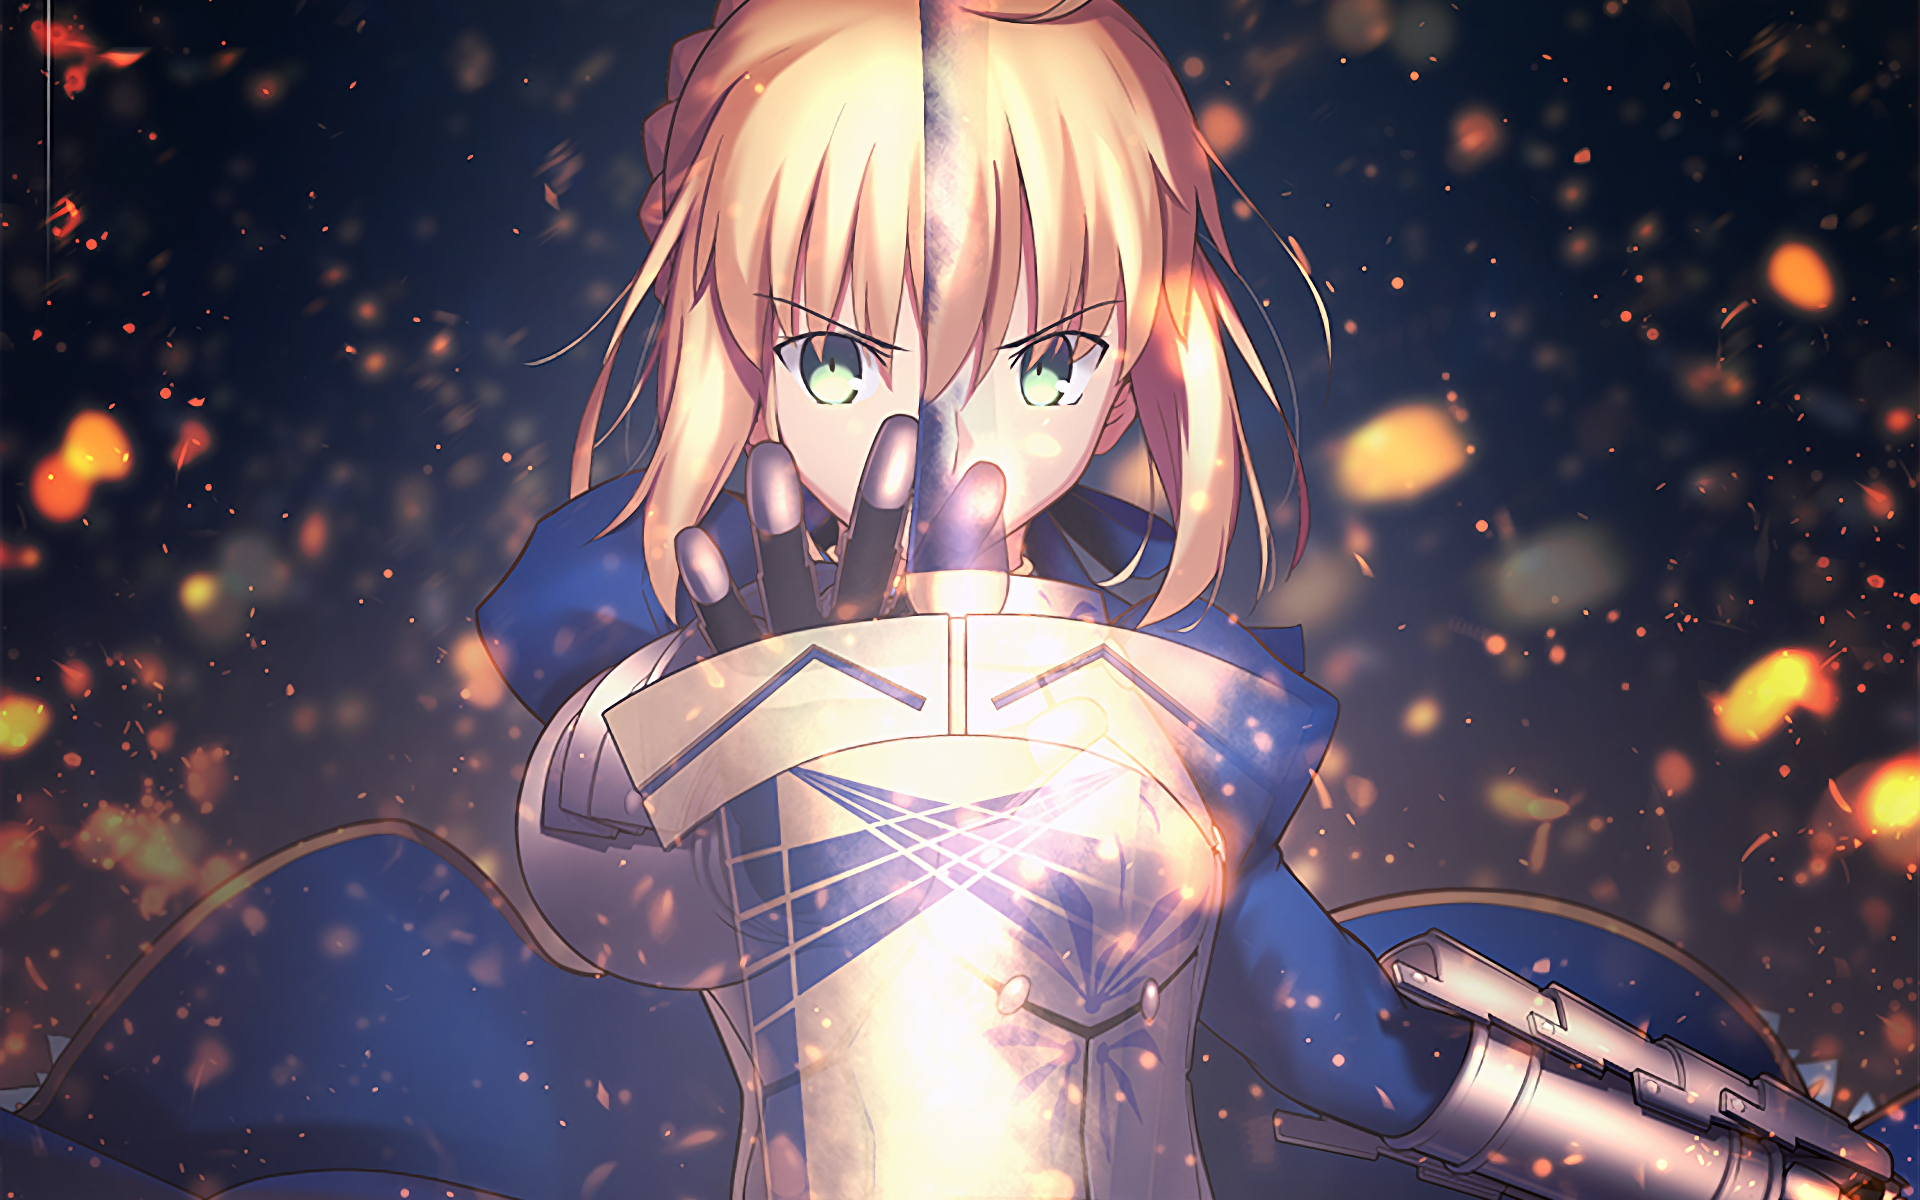 Download Saber (Fate Series) Anime Fate/Stay Night HD Wallpaper